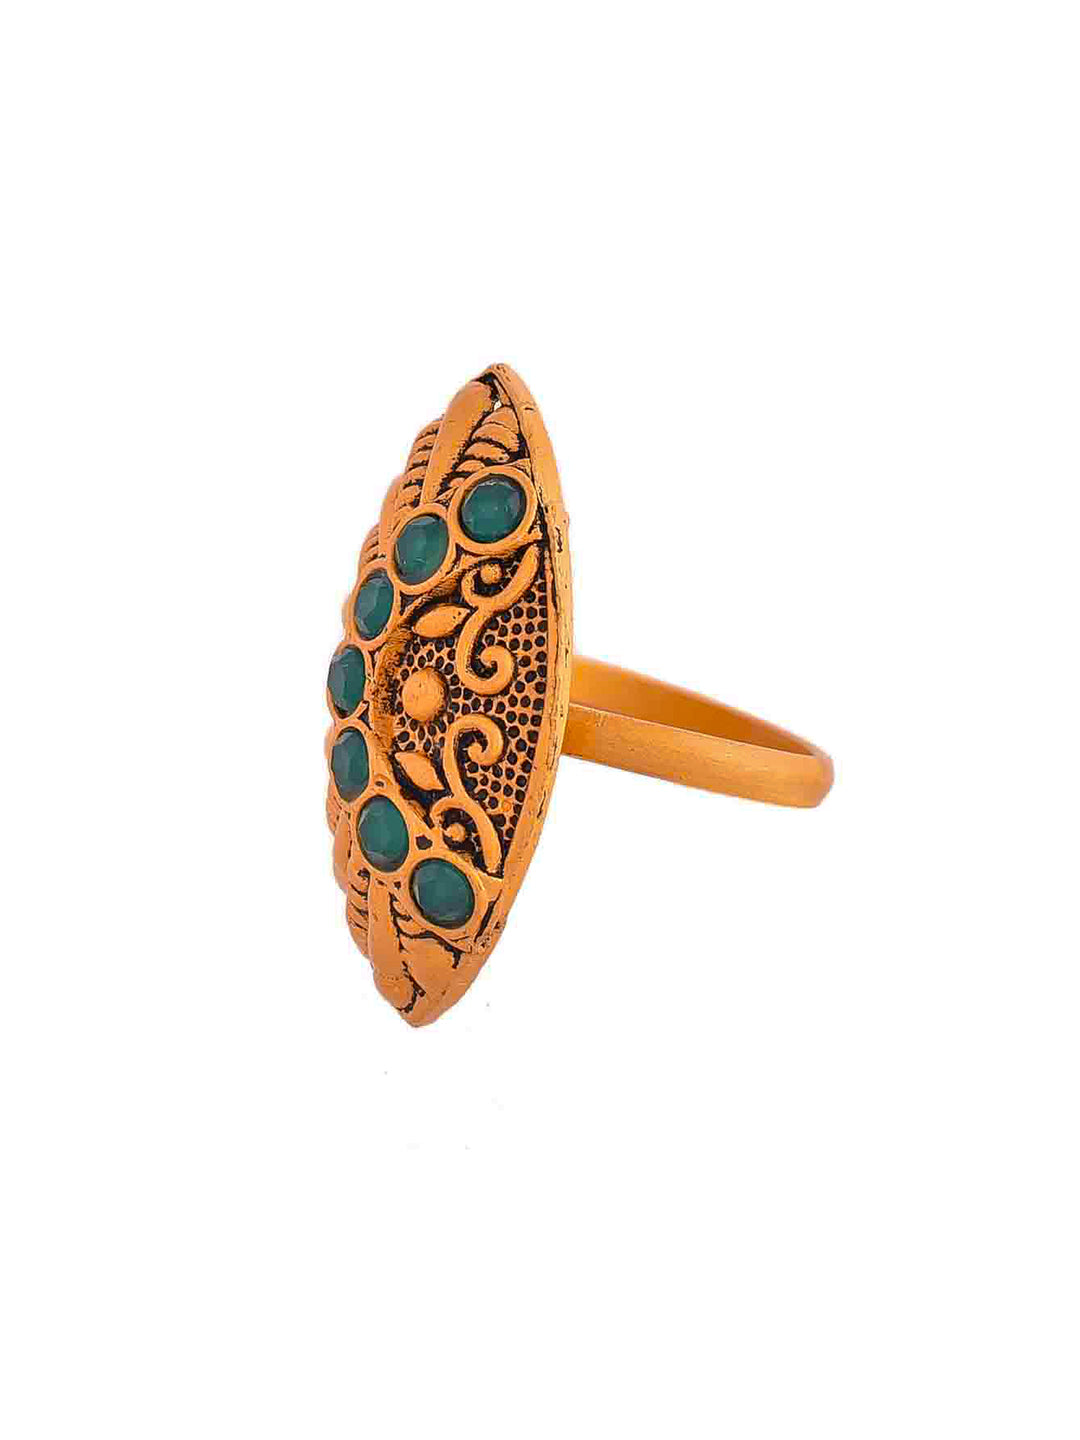 Handcrafted Temple Finger Ring